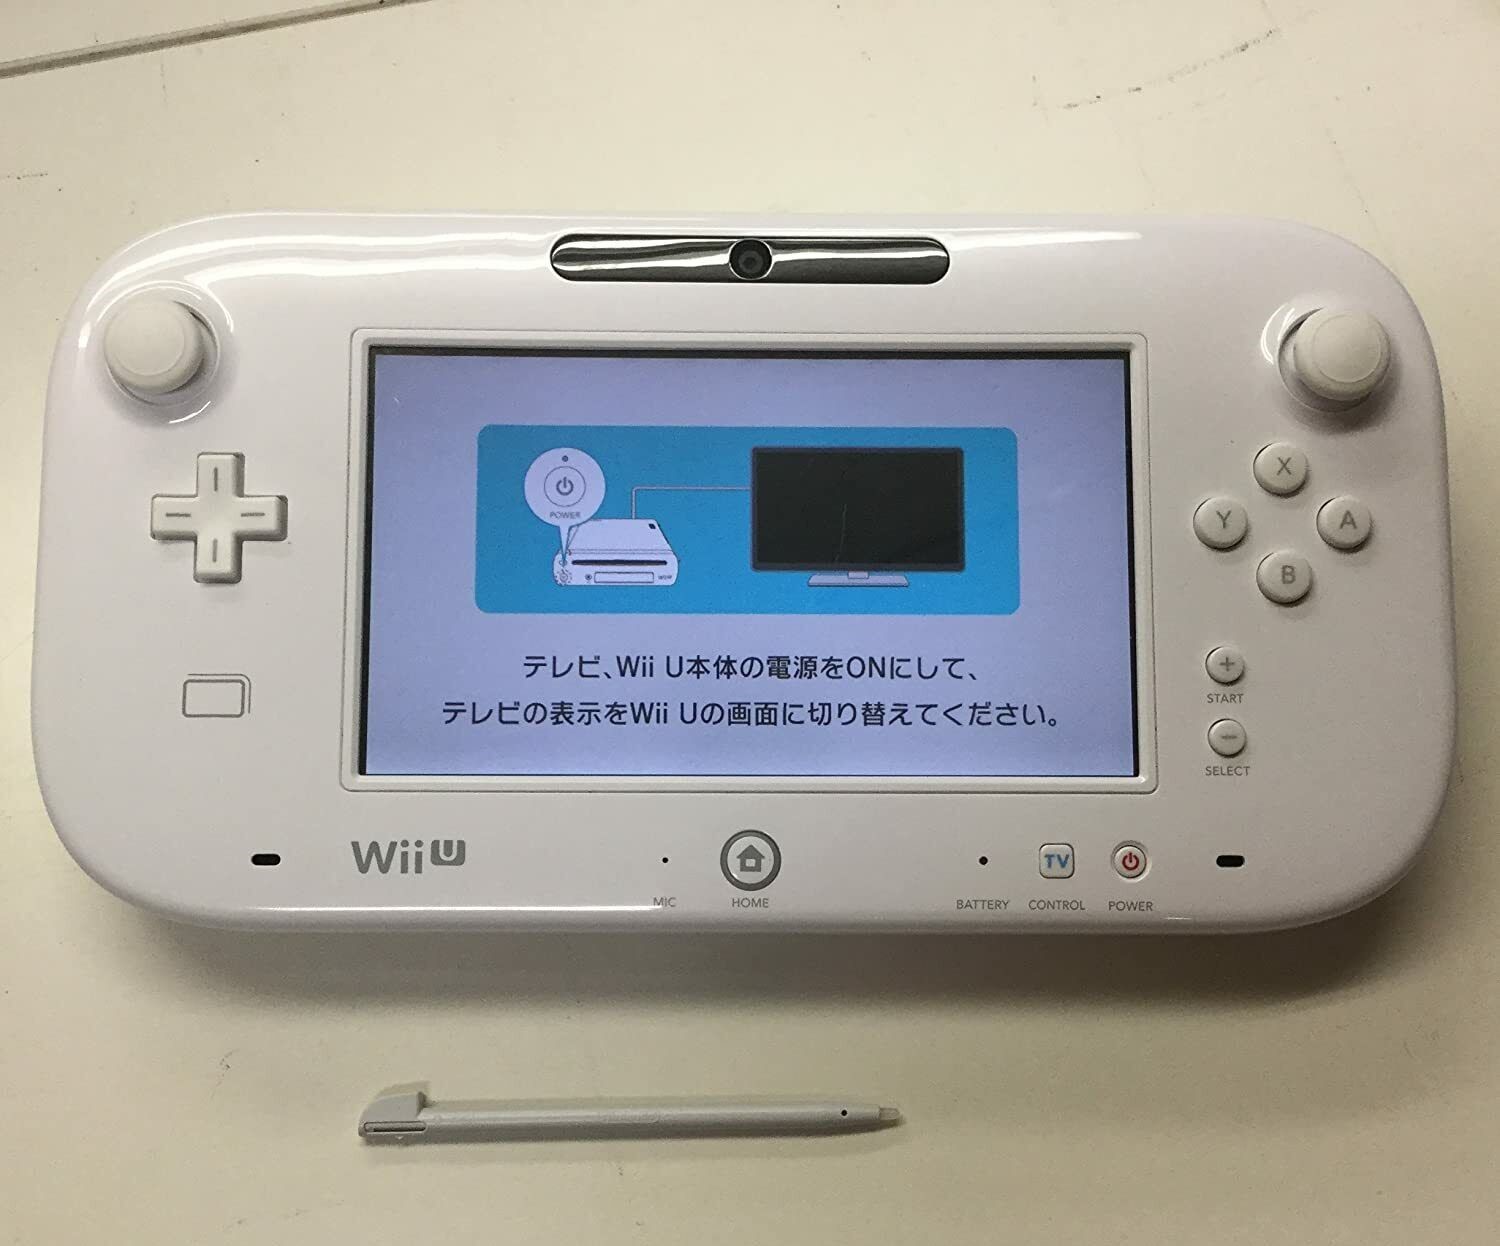 Wii U Stylus Search: Locating The Interactive Tool